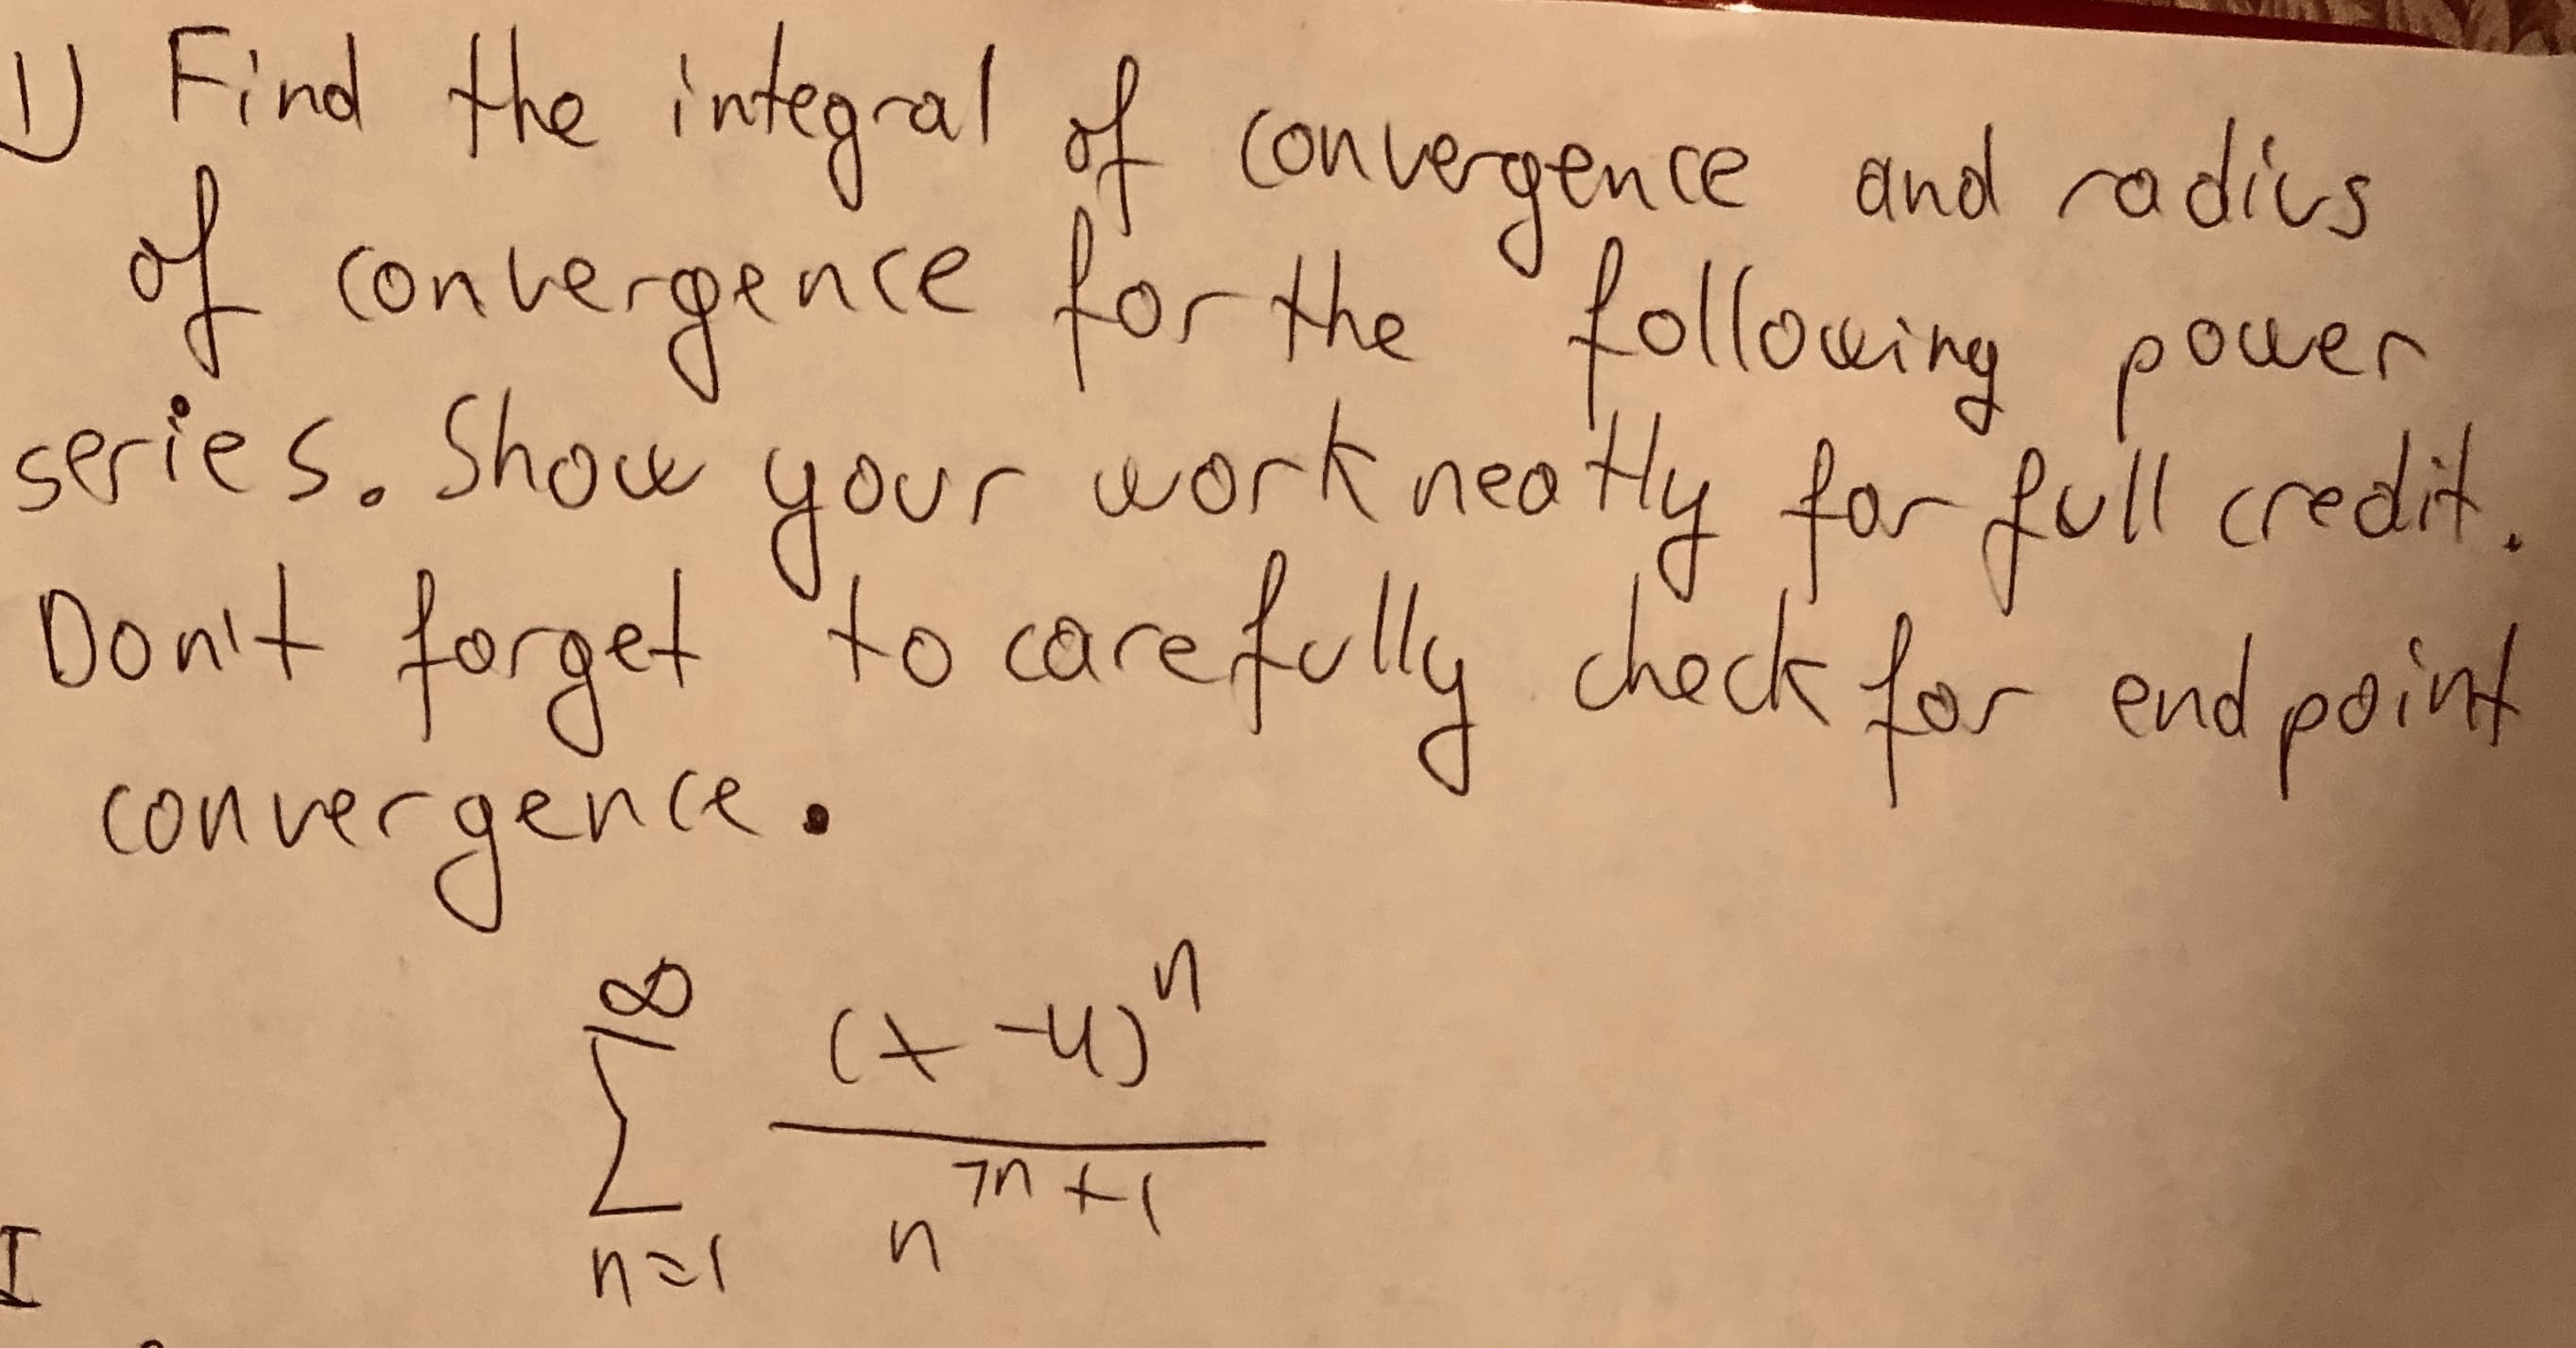 )
Find the integral of con
nvergence and rodius
f convergence for the following pouer
series. Show
work neotly for ful
Don't forget "to carefully check for end point
convergence.
in
